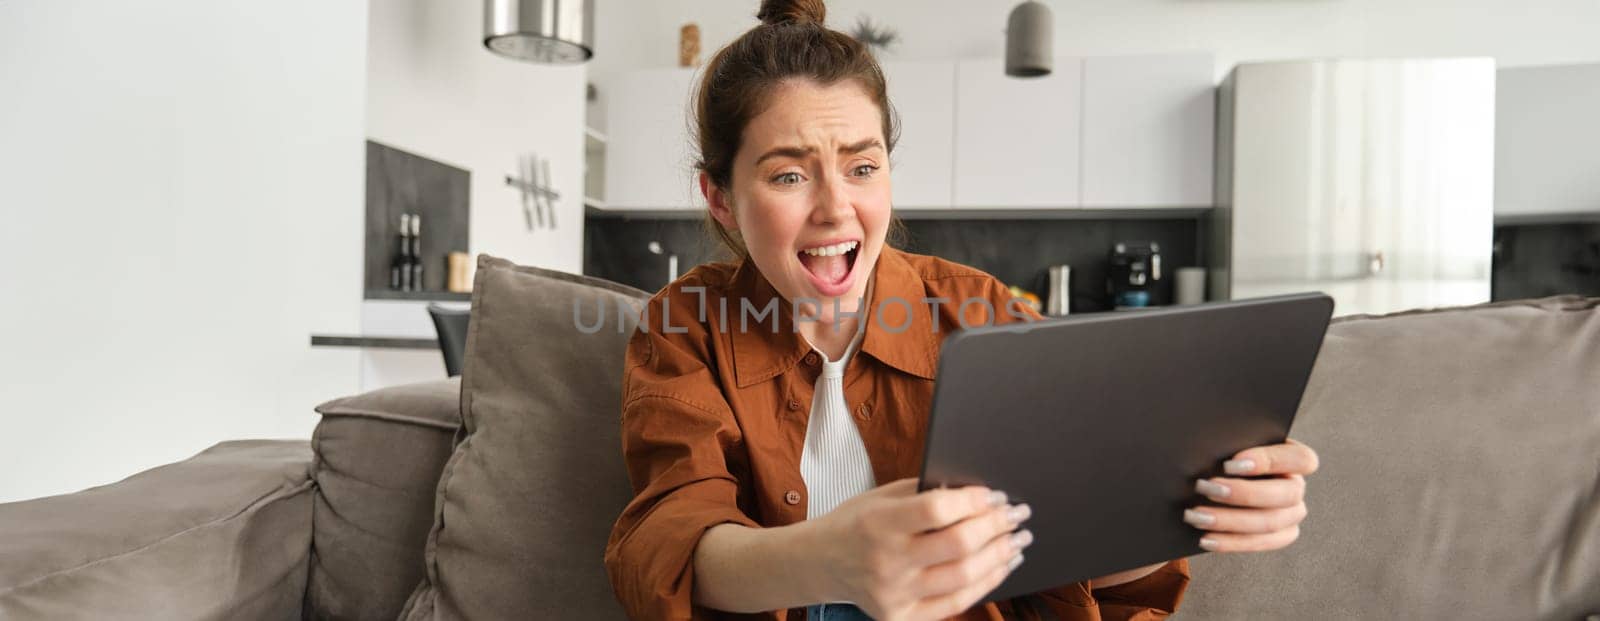 Portrait of woman looking at digital tablet with worried, stressed and upset face, losing in video game, sitting at home on couch.